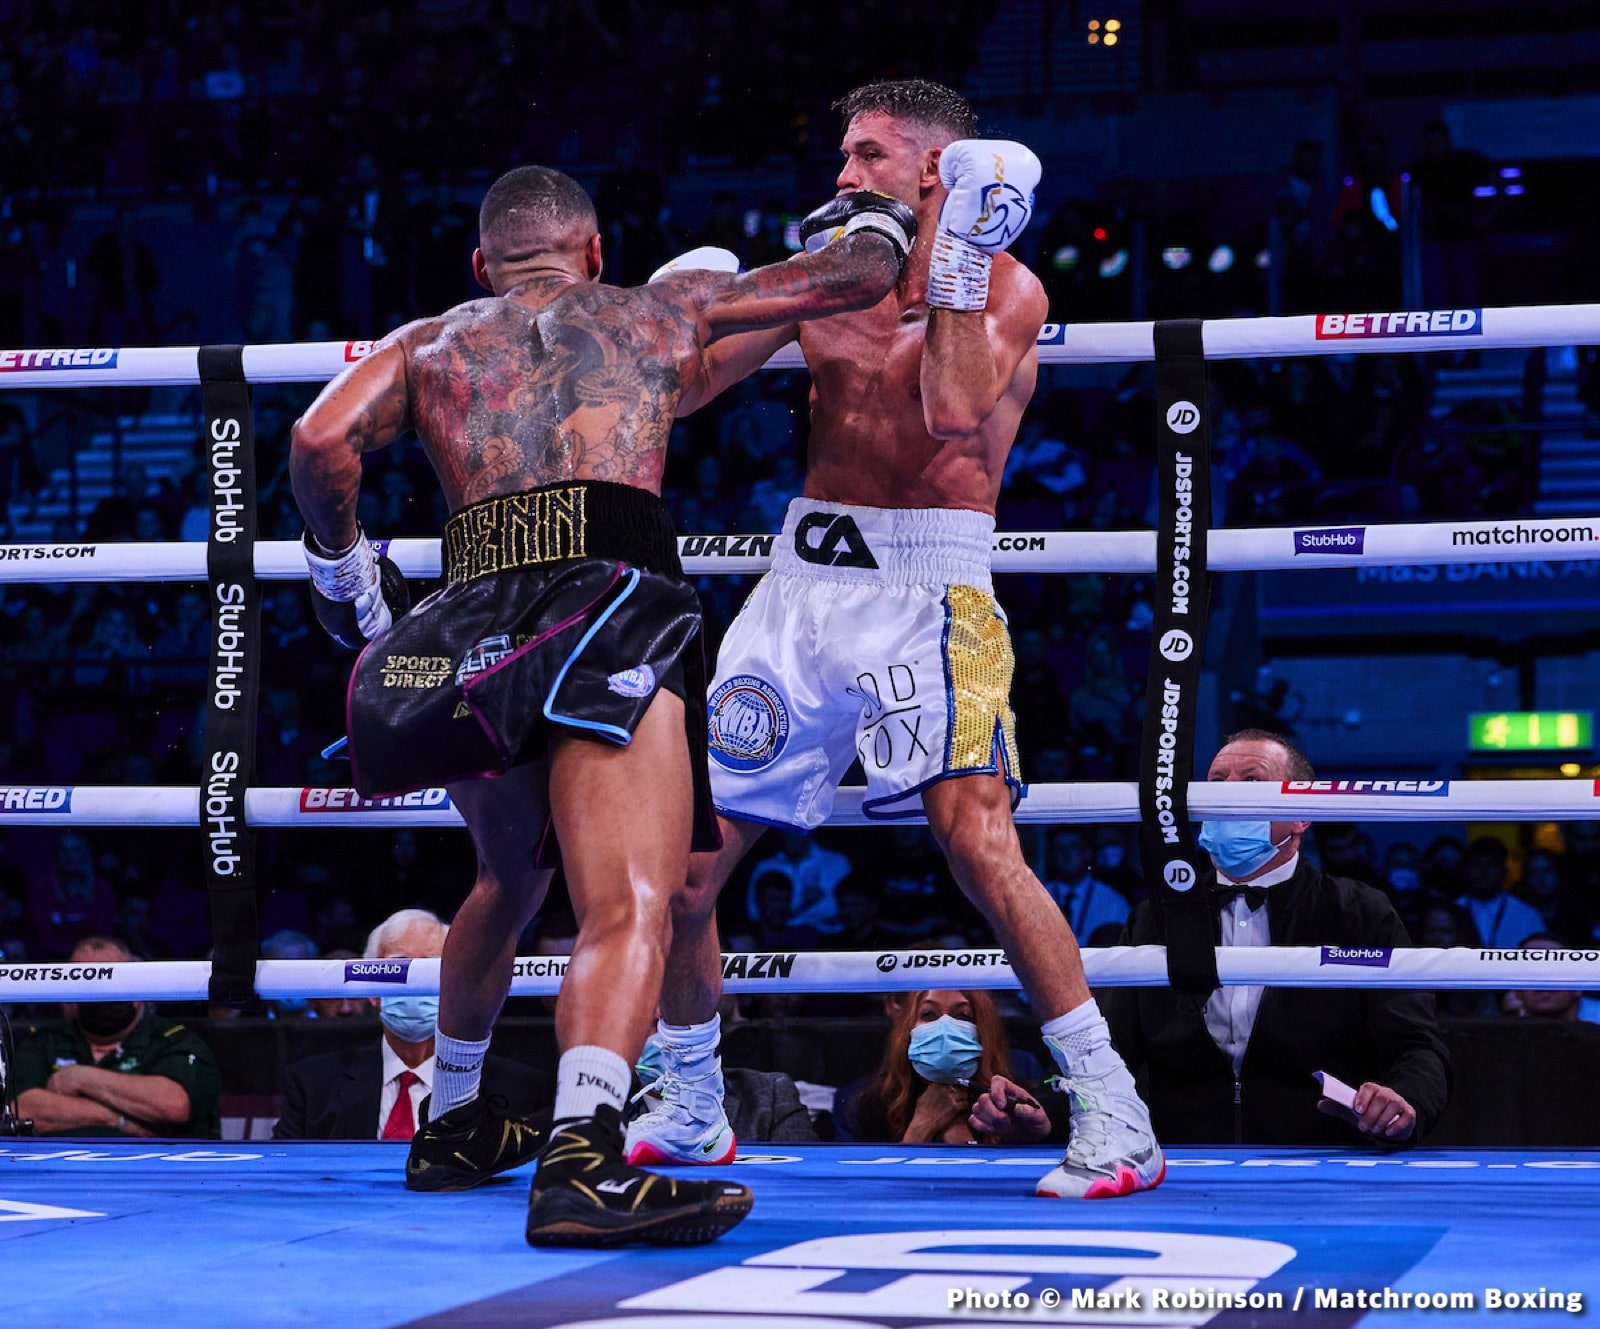 Image: Conor Benn opponent being finalized for April says Eddie Hearn